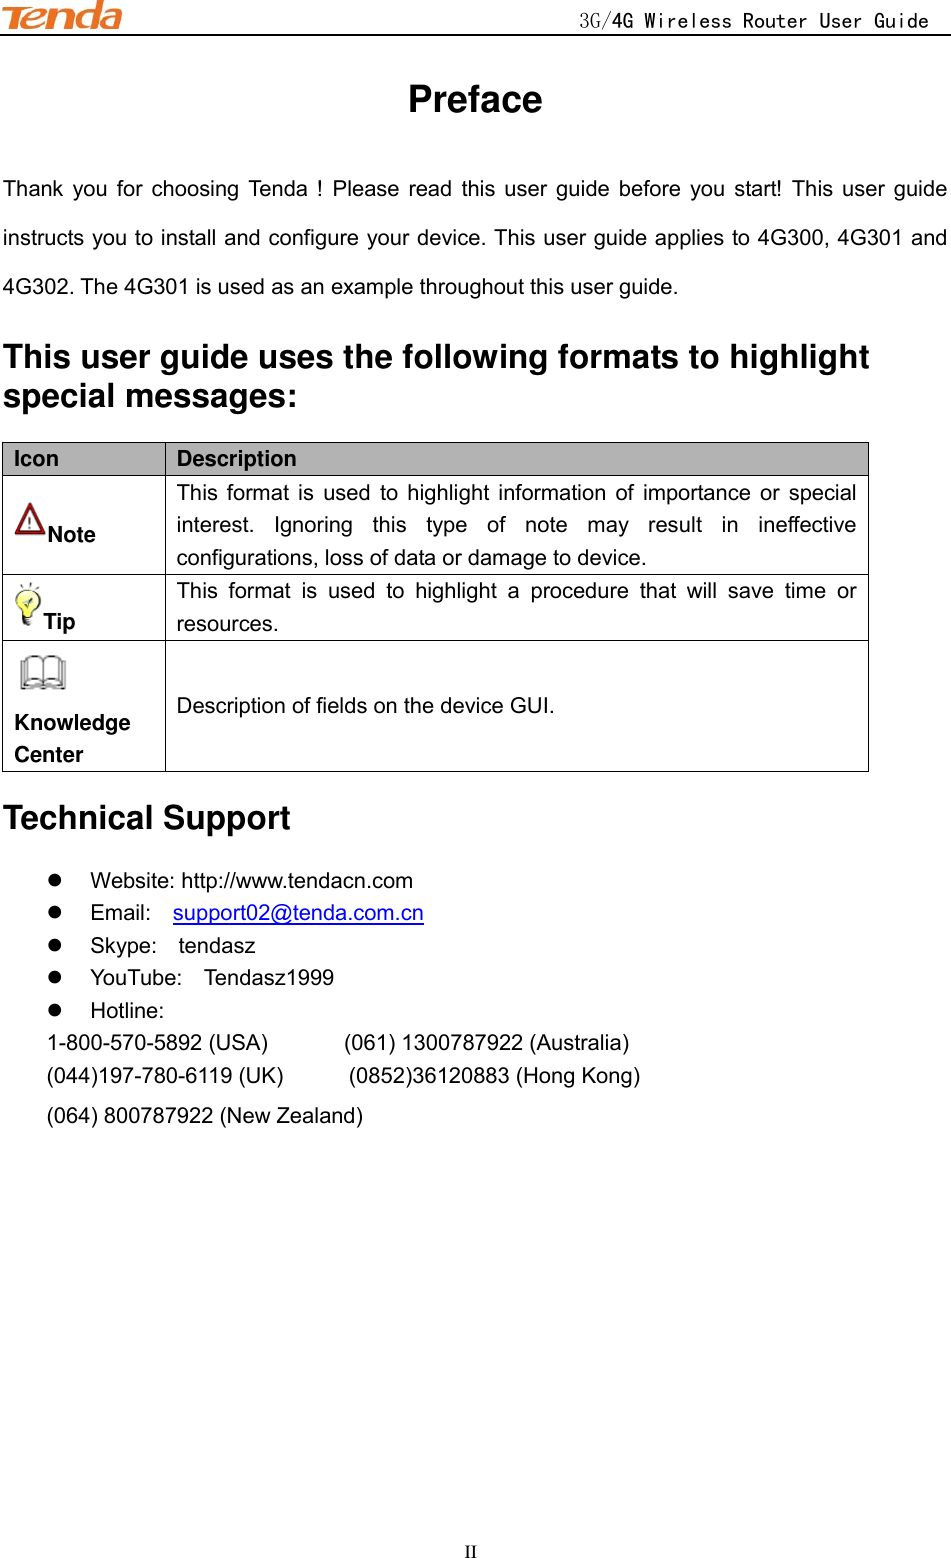                                                    3G/4G Wireless Router User Guide    II Preface Thank  you  for  choosing  Tenda  !  Please  read  this  user  guide  before  you  start!  This  user  guide instructs you to install and configure your device. This user guide applies to 4G300, 4G301 and 4G302. The 4G301 is used as an example throughout this user guide. This user guide uses the following formats to highlight special messages: Icon Description Note This  format  is  used  to  highlight  information  of  importance  or  special interest.  Ignoring  this  type  of  note  may  result  in  ineffective configurations, loss of data or damage to device. Tip This  format  is  used  to  highlight  a  procedure  that  will  save  time  or resources.  Knowledge Center Description of fields on the device GUI. Technical Support   Website: http://www.tendacn.com   Email:    support02@tenda.com.cn   Skype:    tendasz   YouTube:    Tendasz1999   Hotline:   1-800-570-5892 (USA)              (061) 1300787922 (Australia)     (044)197-780-6119 (UK)            (0852)36120883 (Hong Kong)   (064) 800787922 (New Zealand) 